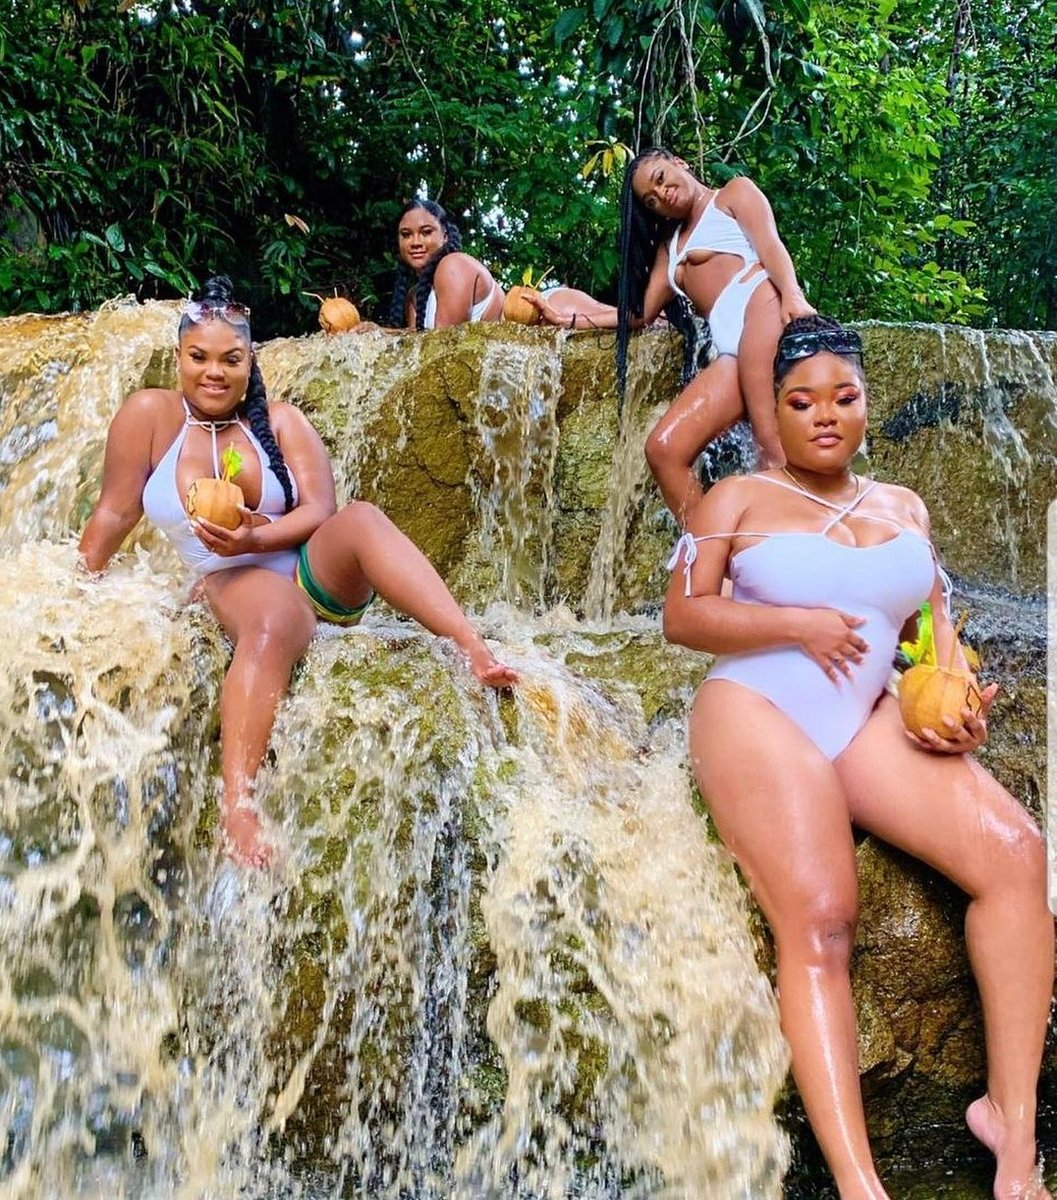 Expore Guyana and enjoys all the great adventures we have to offer. Dress the part, take dem pics and vogue 🎉💃🙌
Location : Baracara Falls

#tourismGuyana #travelGuyana #AdventureGuyana #Guyanese #Guyana #Guyananice Check- 
tourismguyana.gy
Photo : @Nickiszala